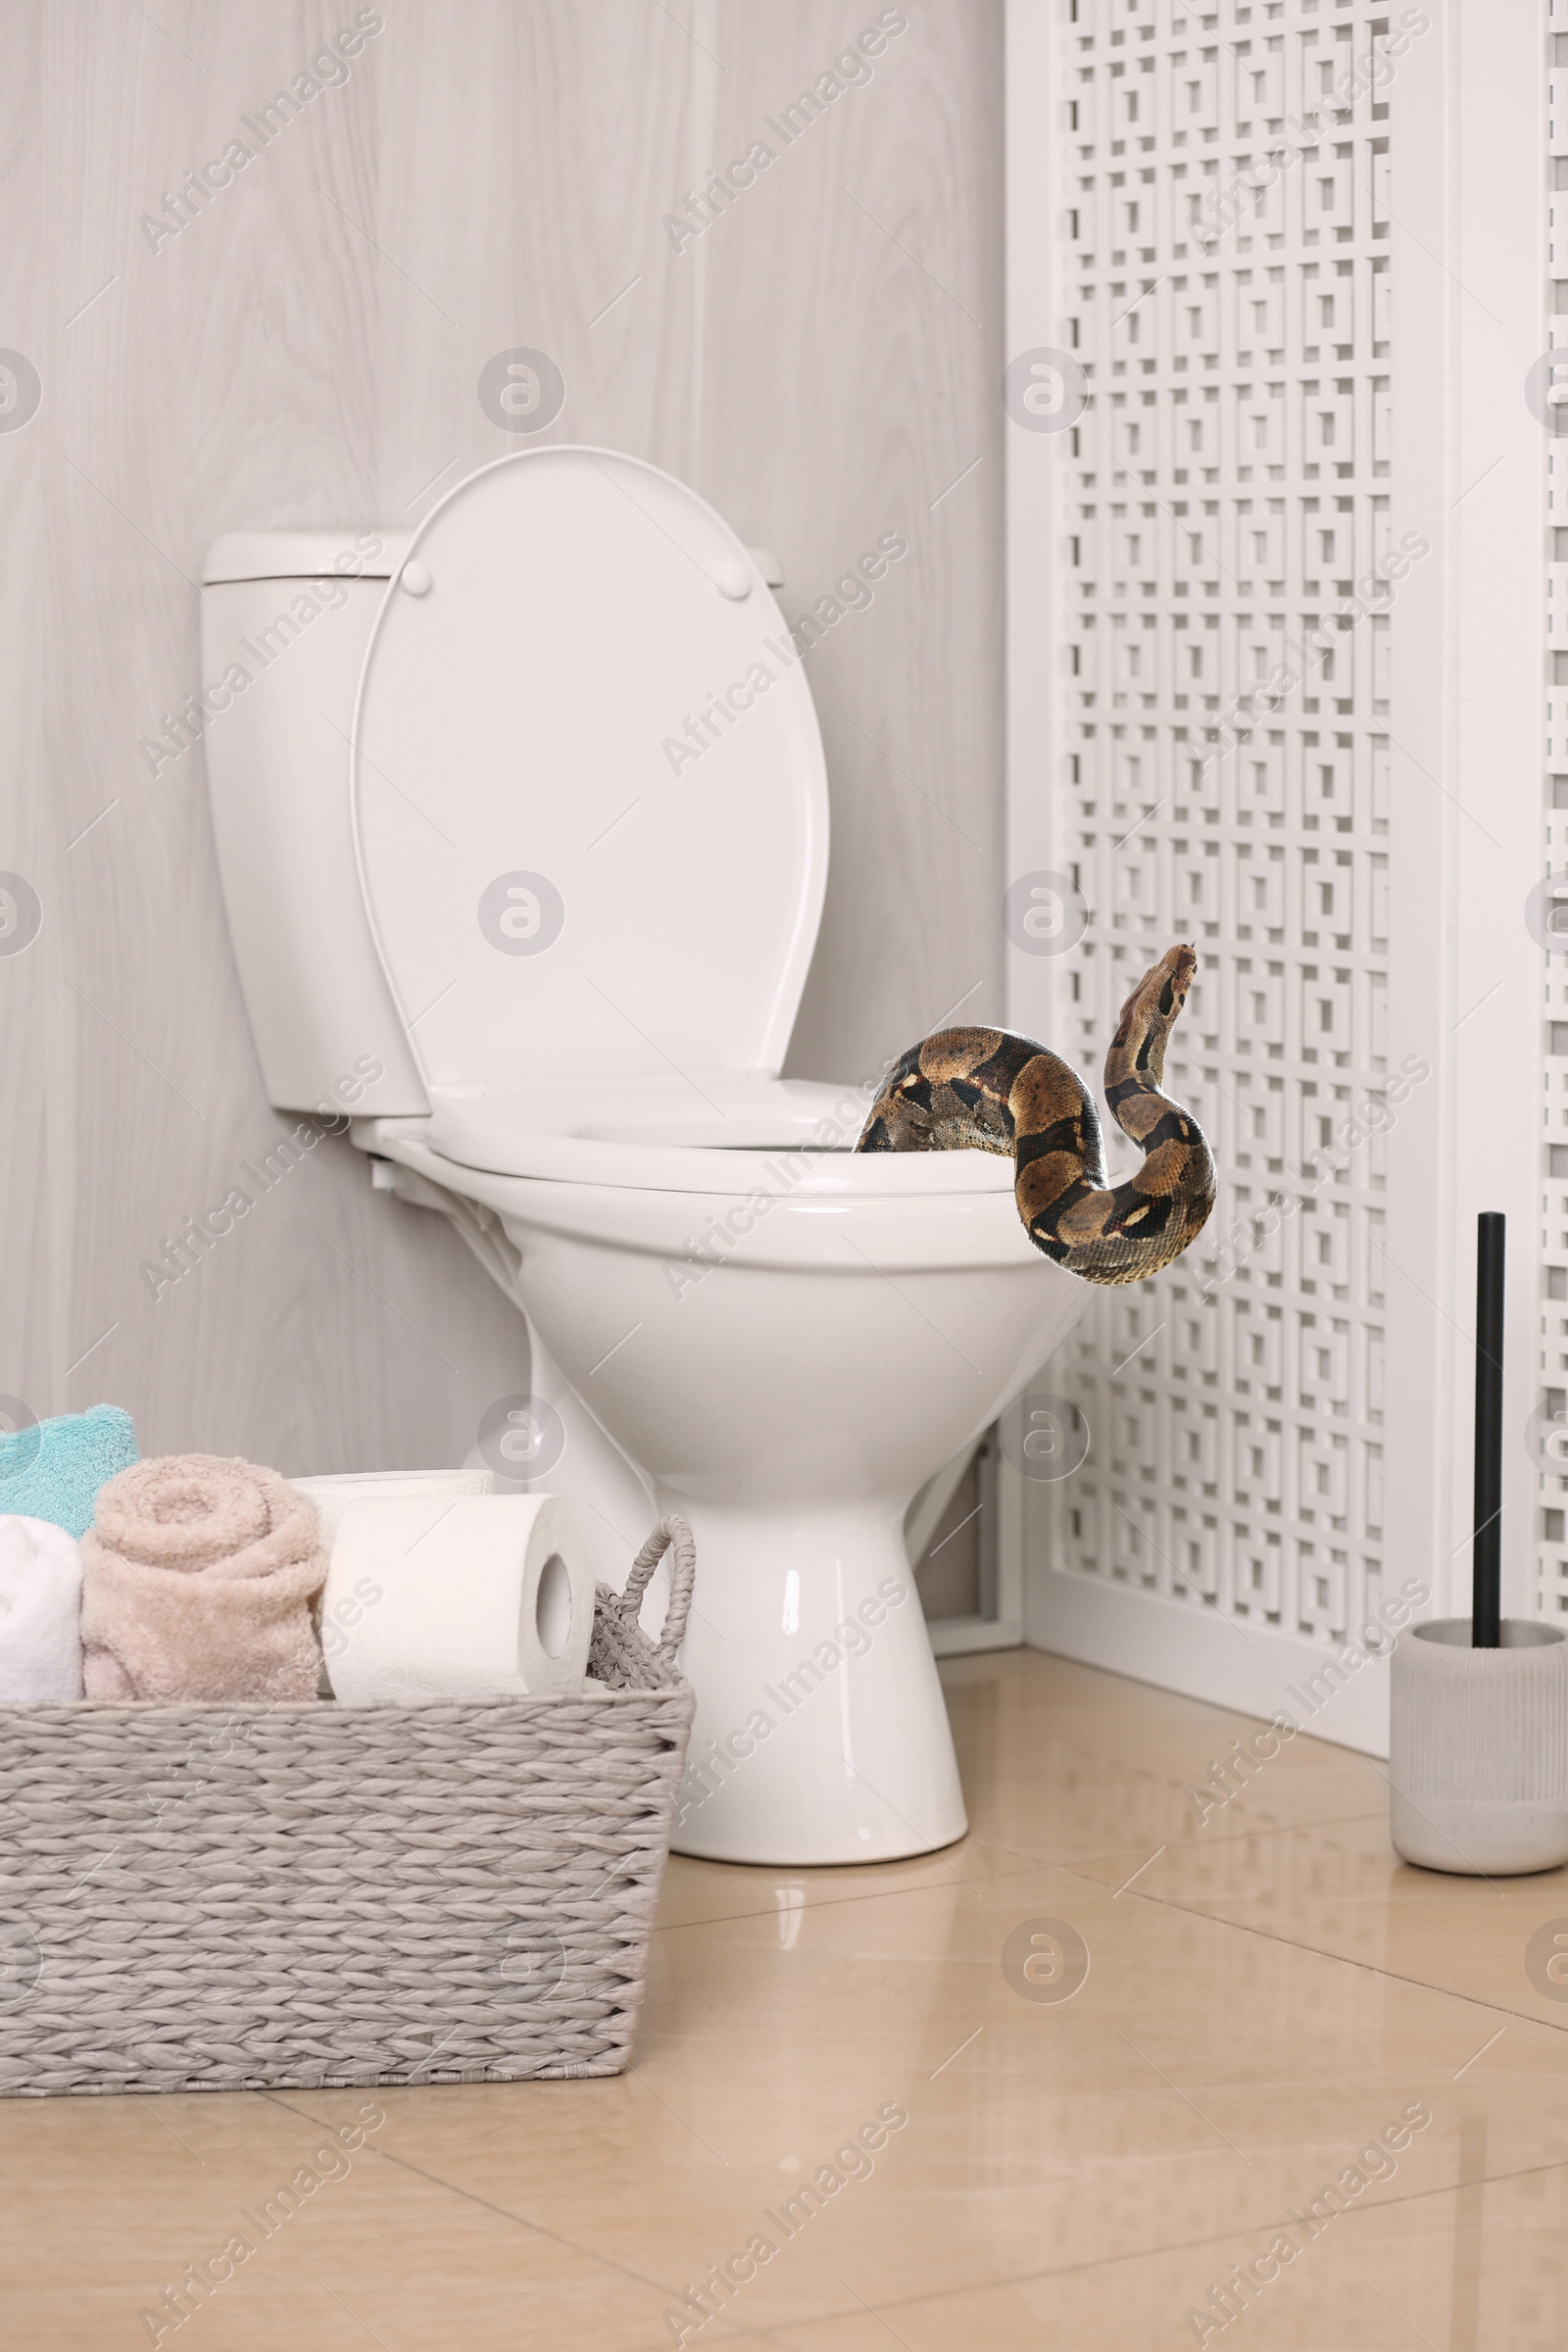 Image of Brown boa constrictor crawling out from toilet bowl in bathroom 